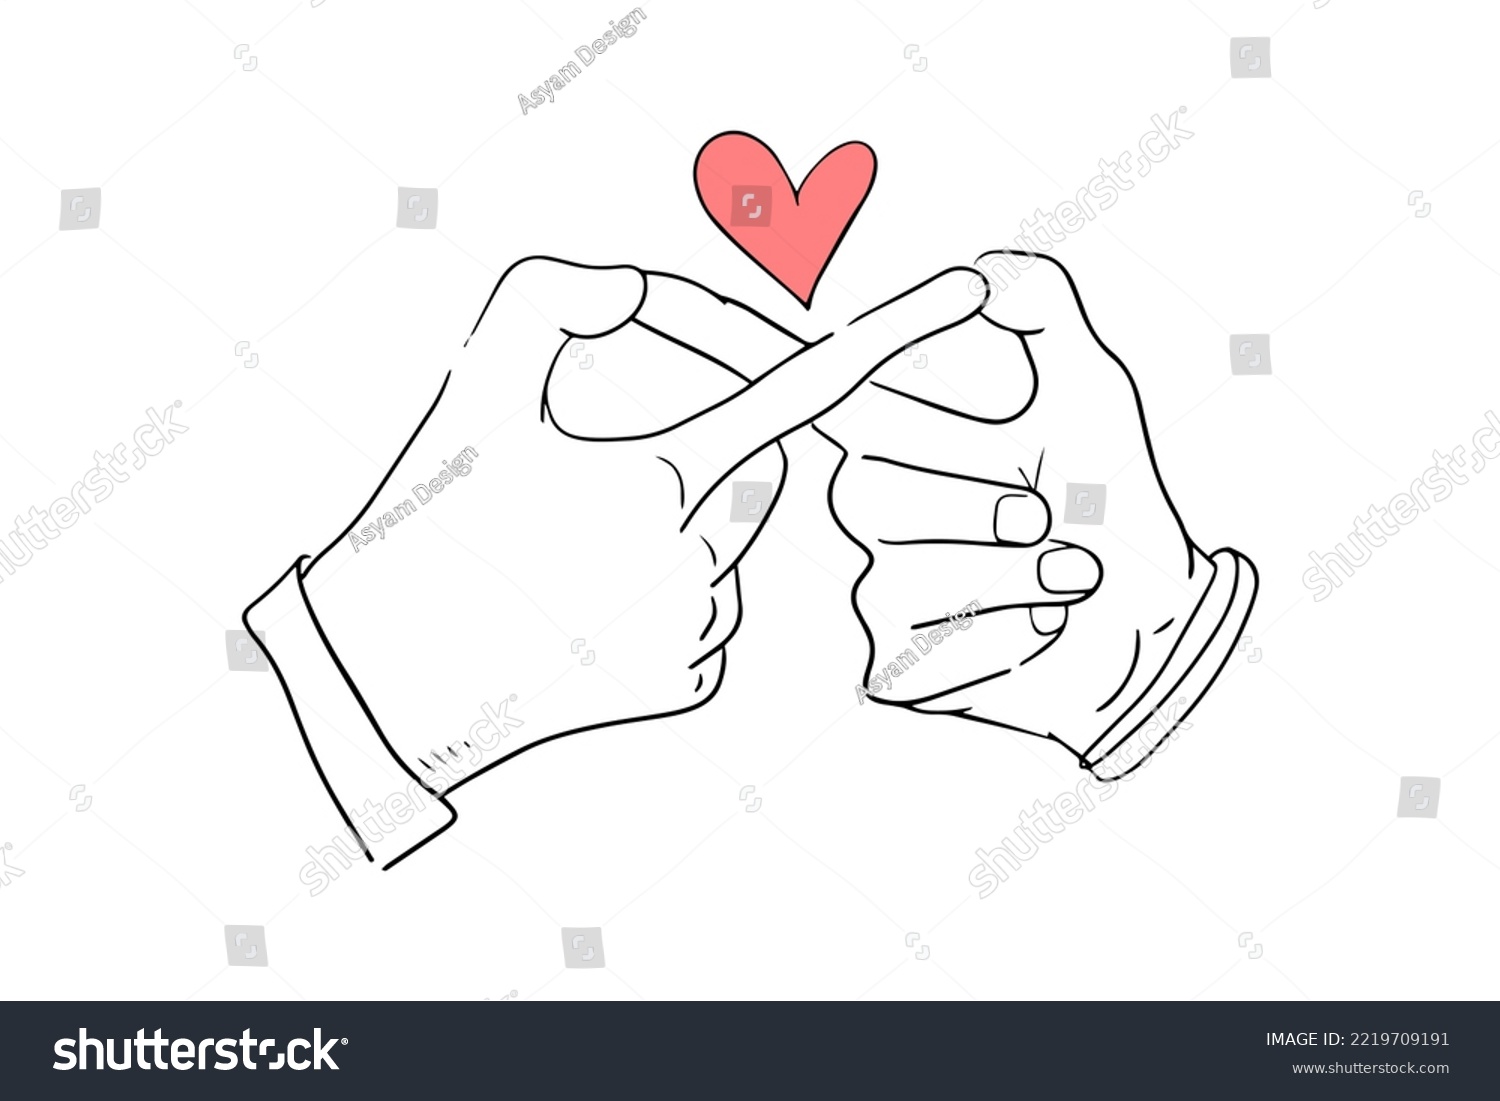 SVG of Two hands form a symbol of love and care. svg